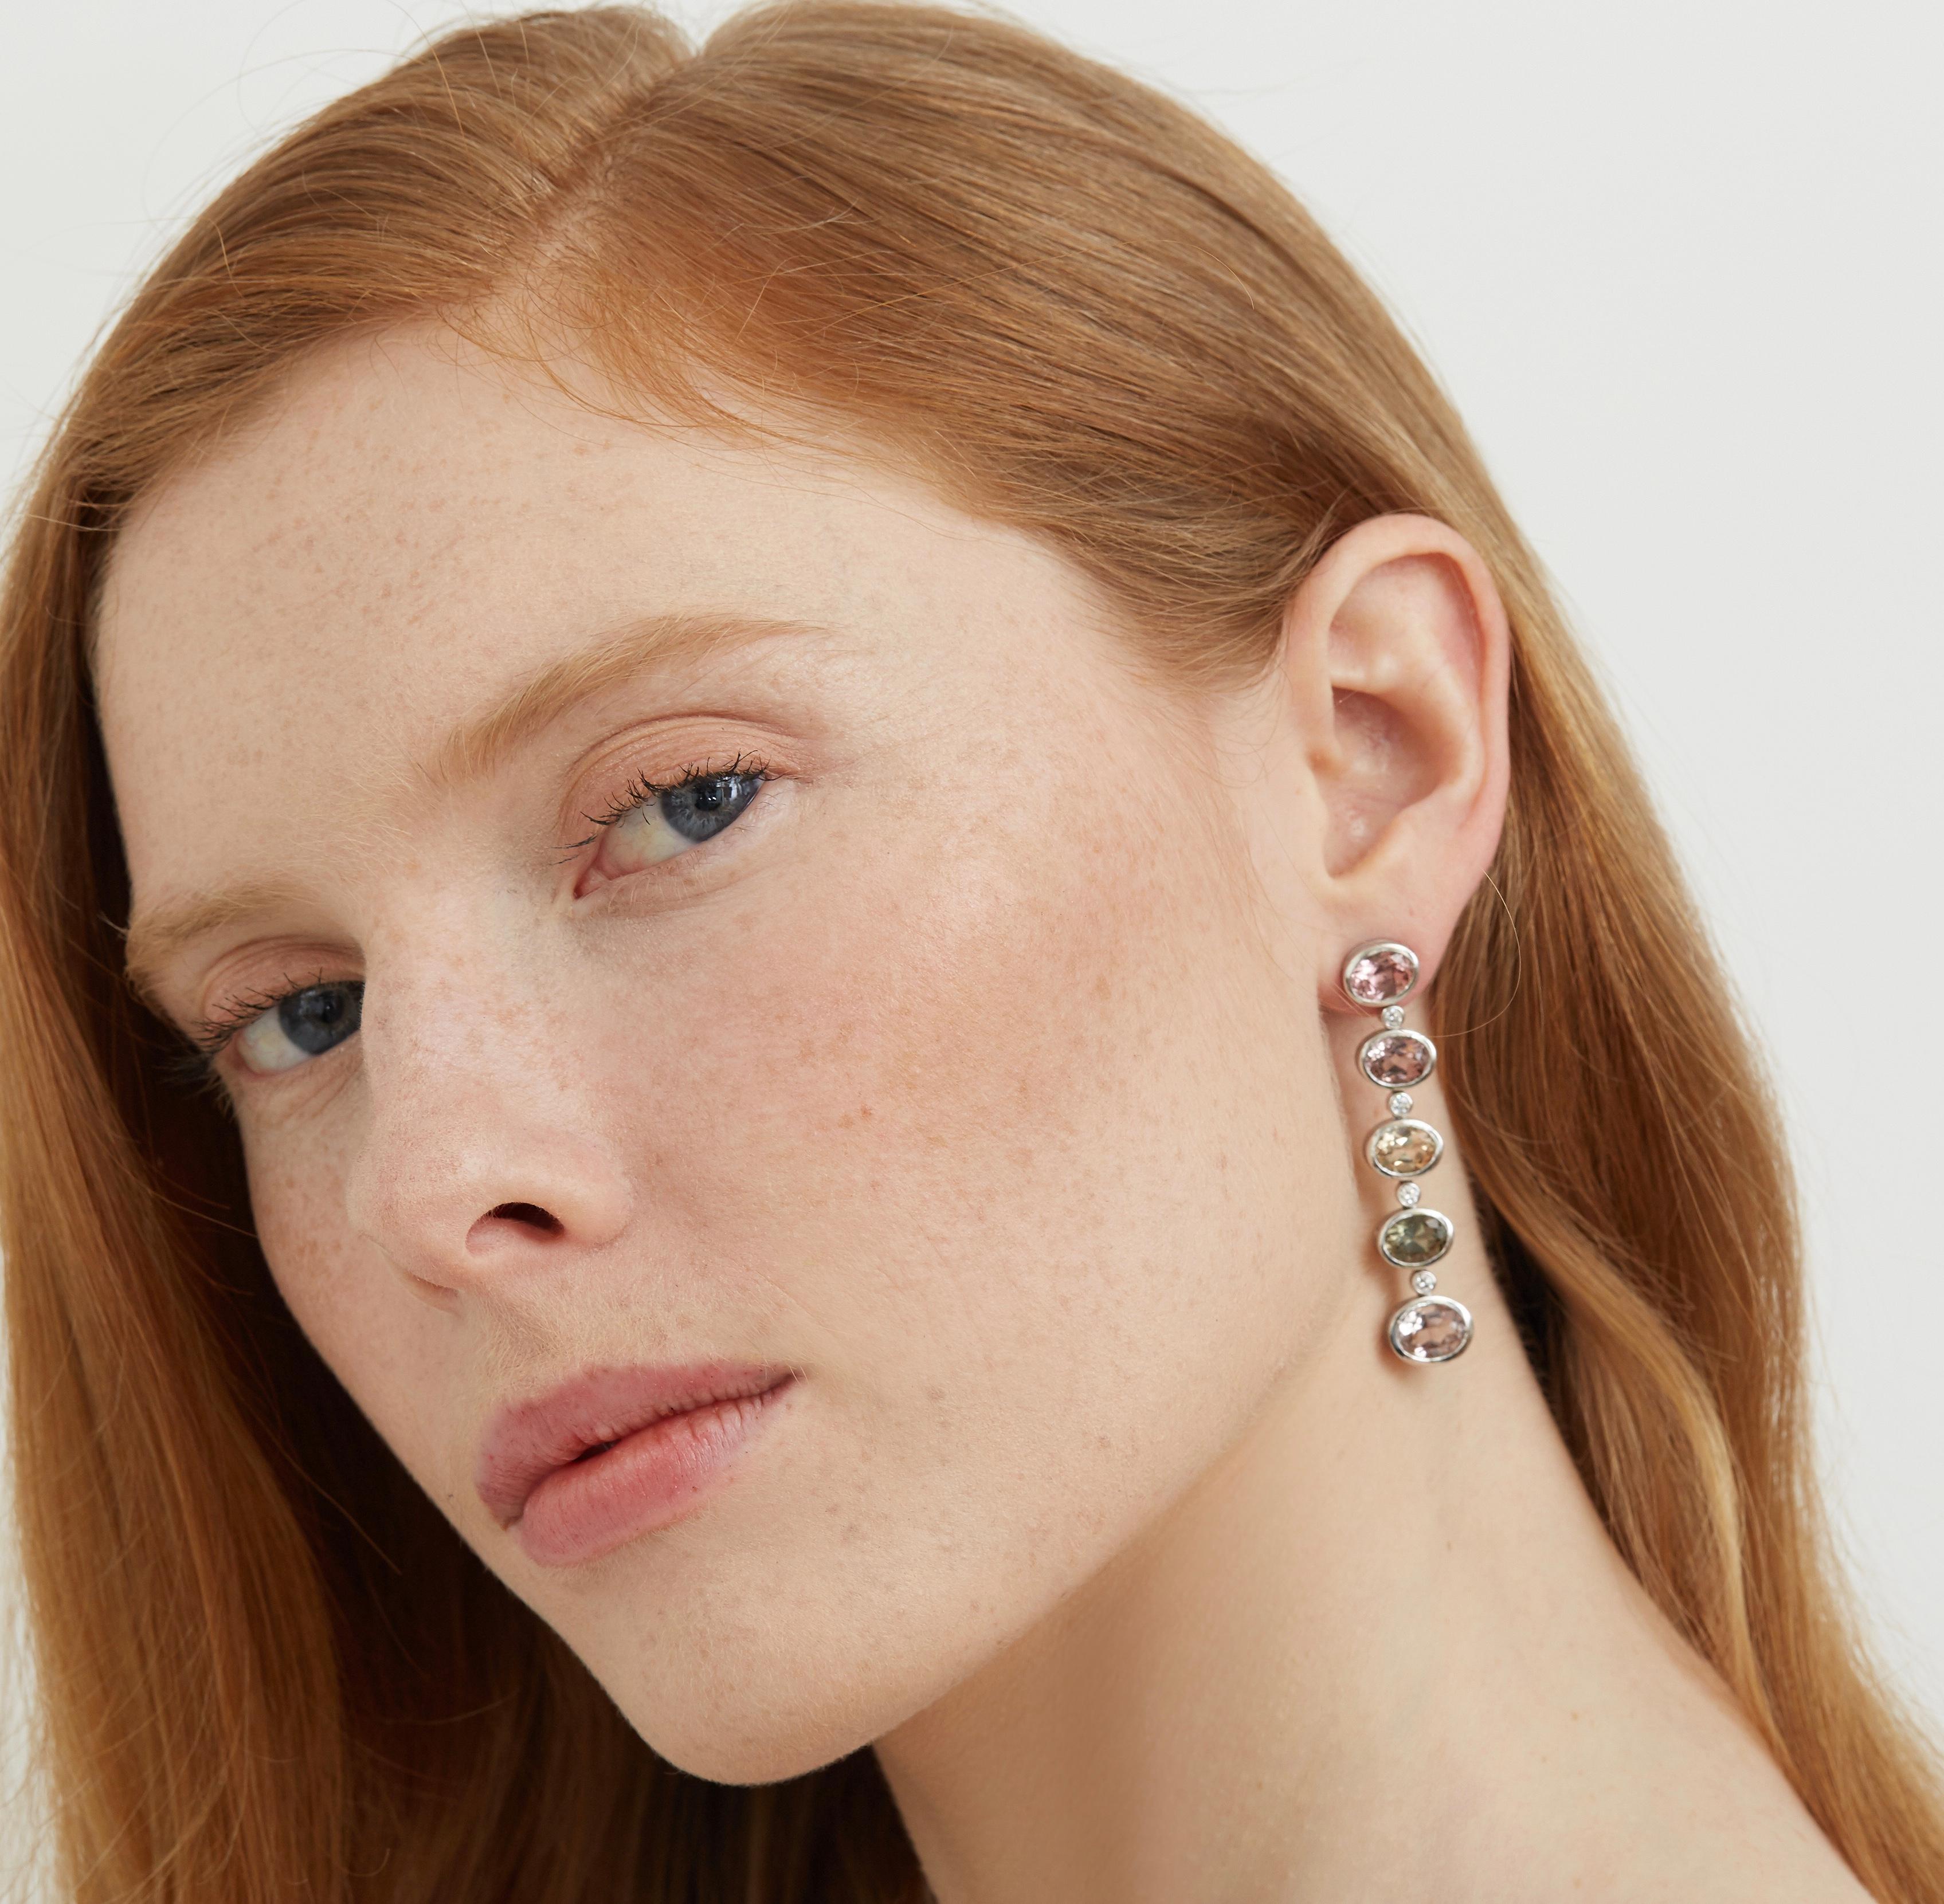 Make a grand statement in these Lilly Hastedt chandelier earrings which feature different pastel coloured tourmalines enveloped in 18 karat gold.  The subtle tones sparkle and blend well with all skin tones and will complete any outfit for a special